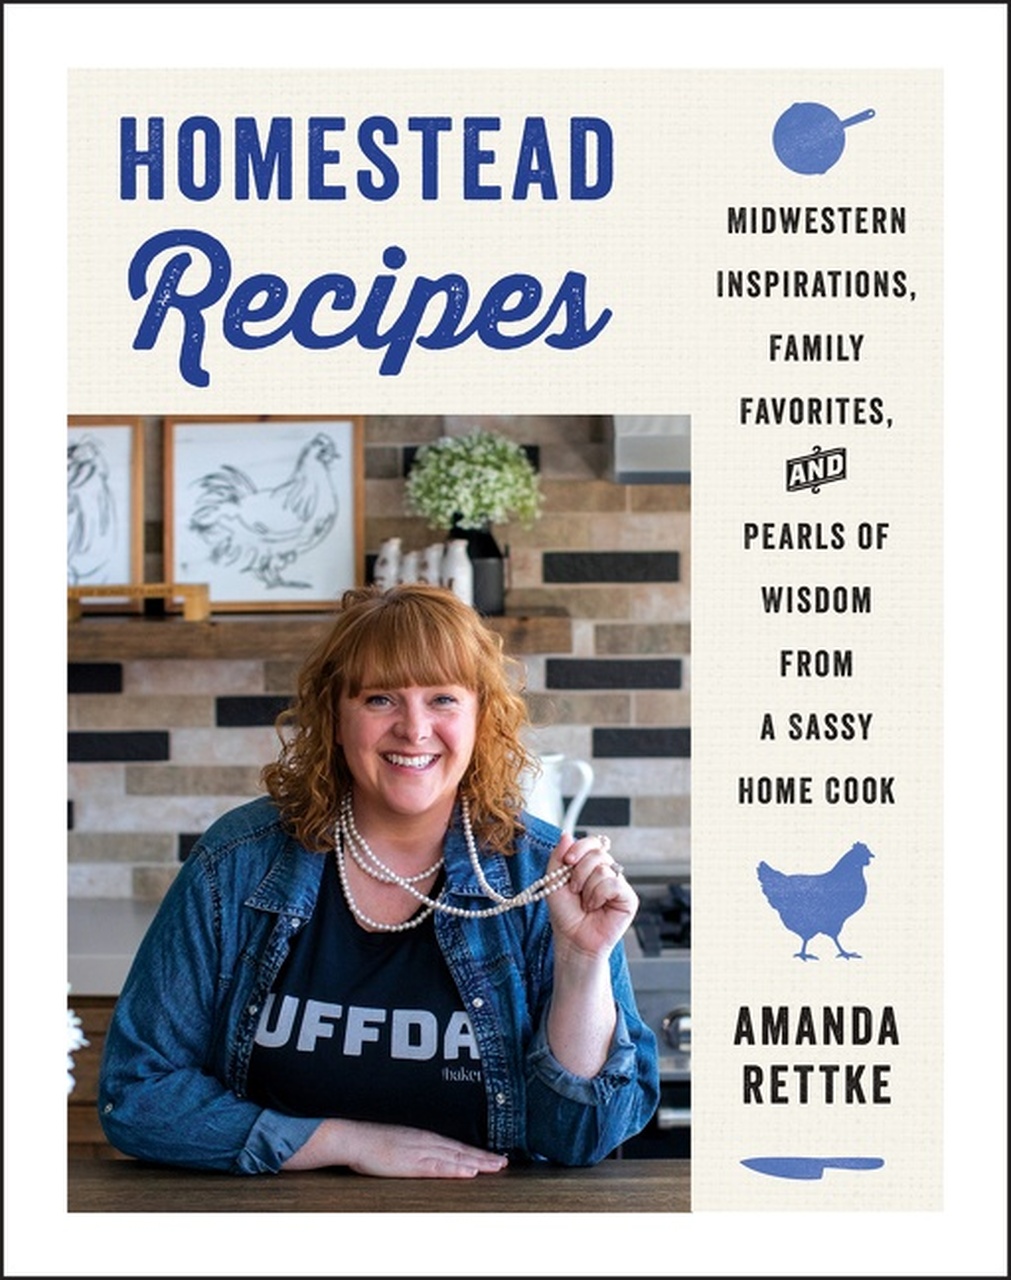 Homestead Recipes: Midwestern Inspirations, Family Favorites, and Pearls of Wisdom from a Sassy Home Cook 